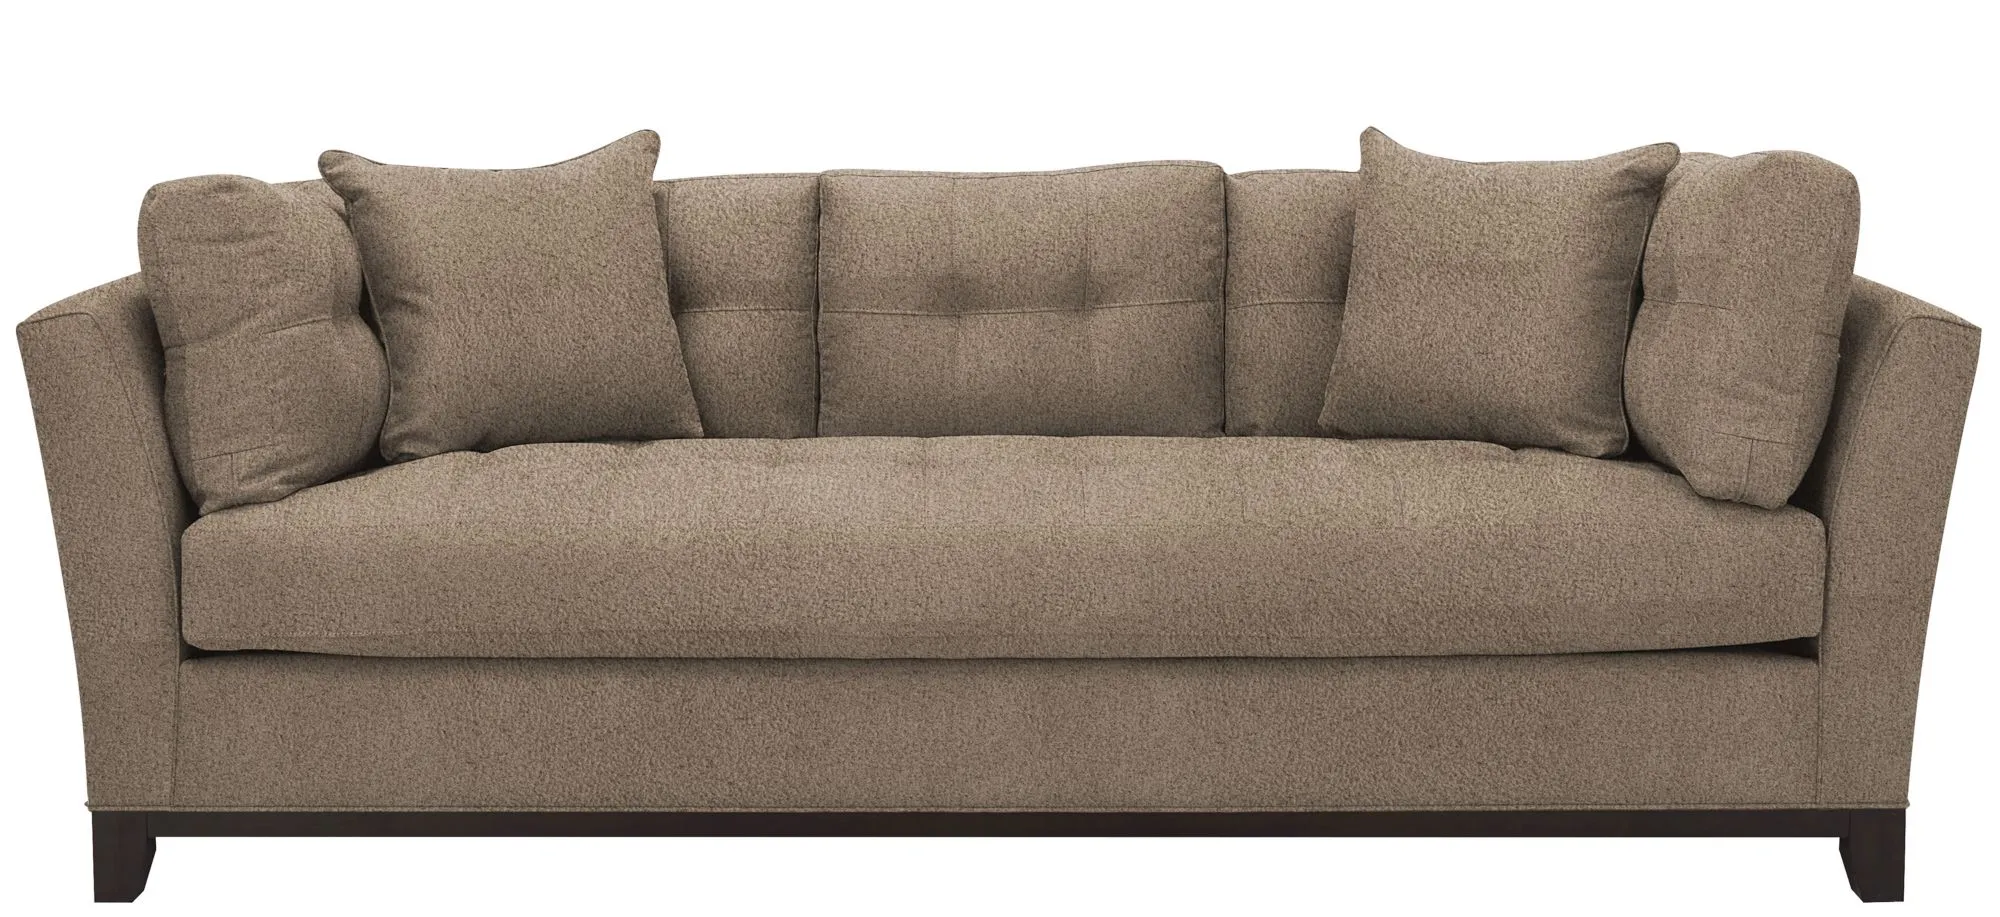 Cityscape Sofa in Suede So Soft Mineral by H.M. Richards